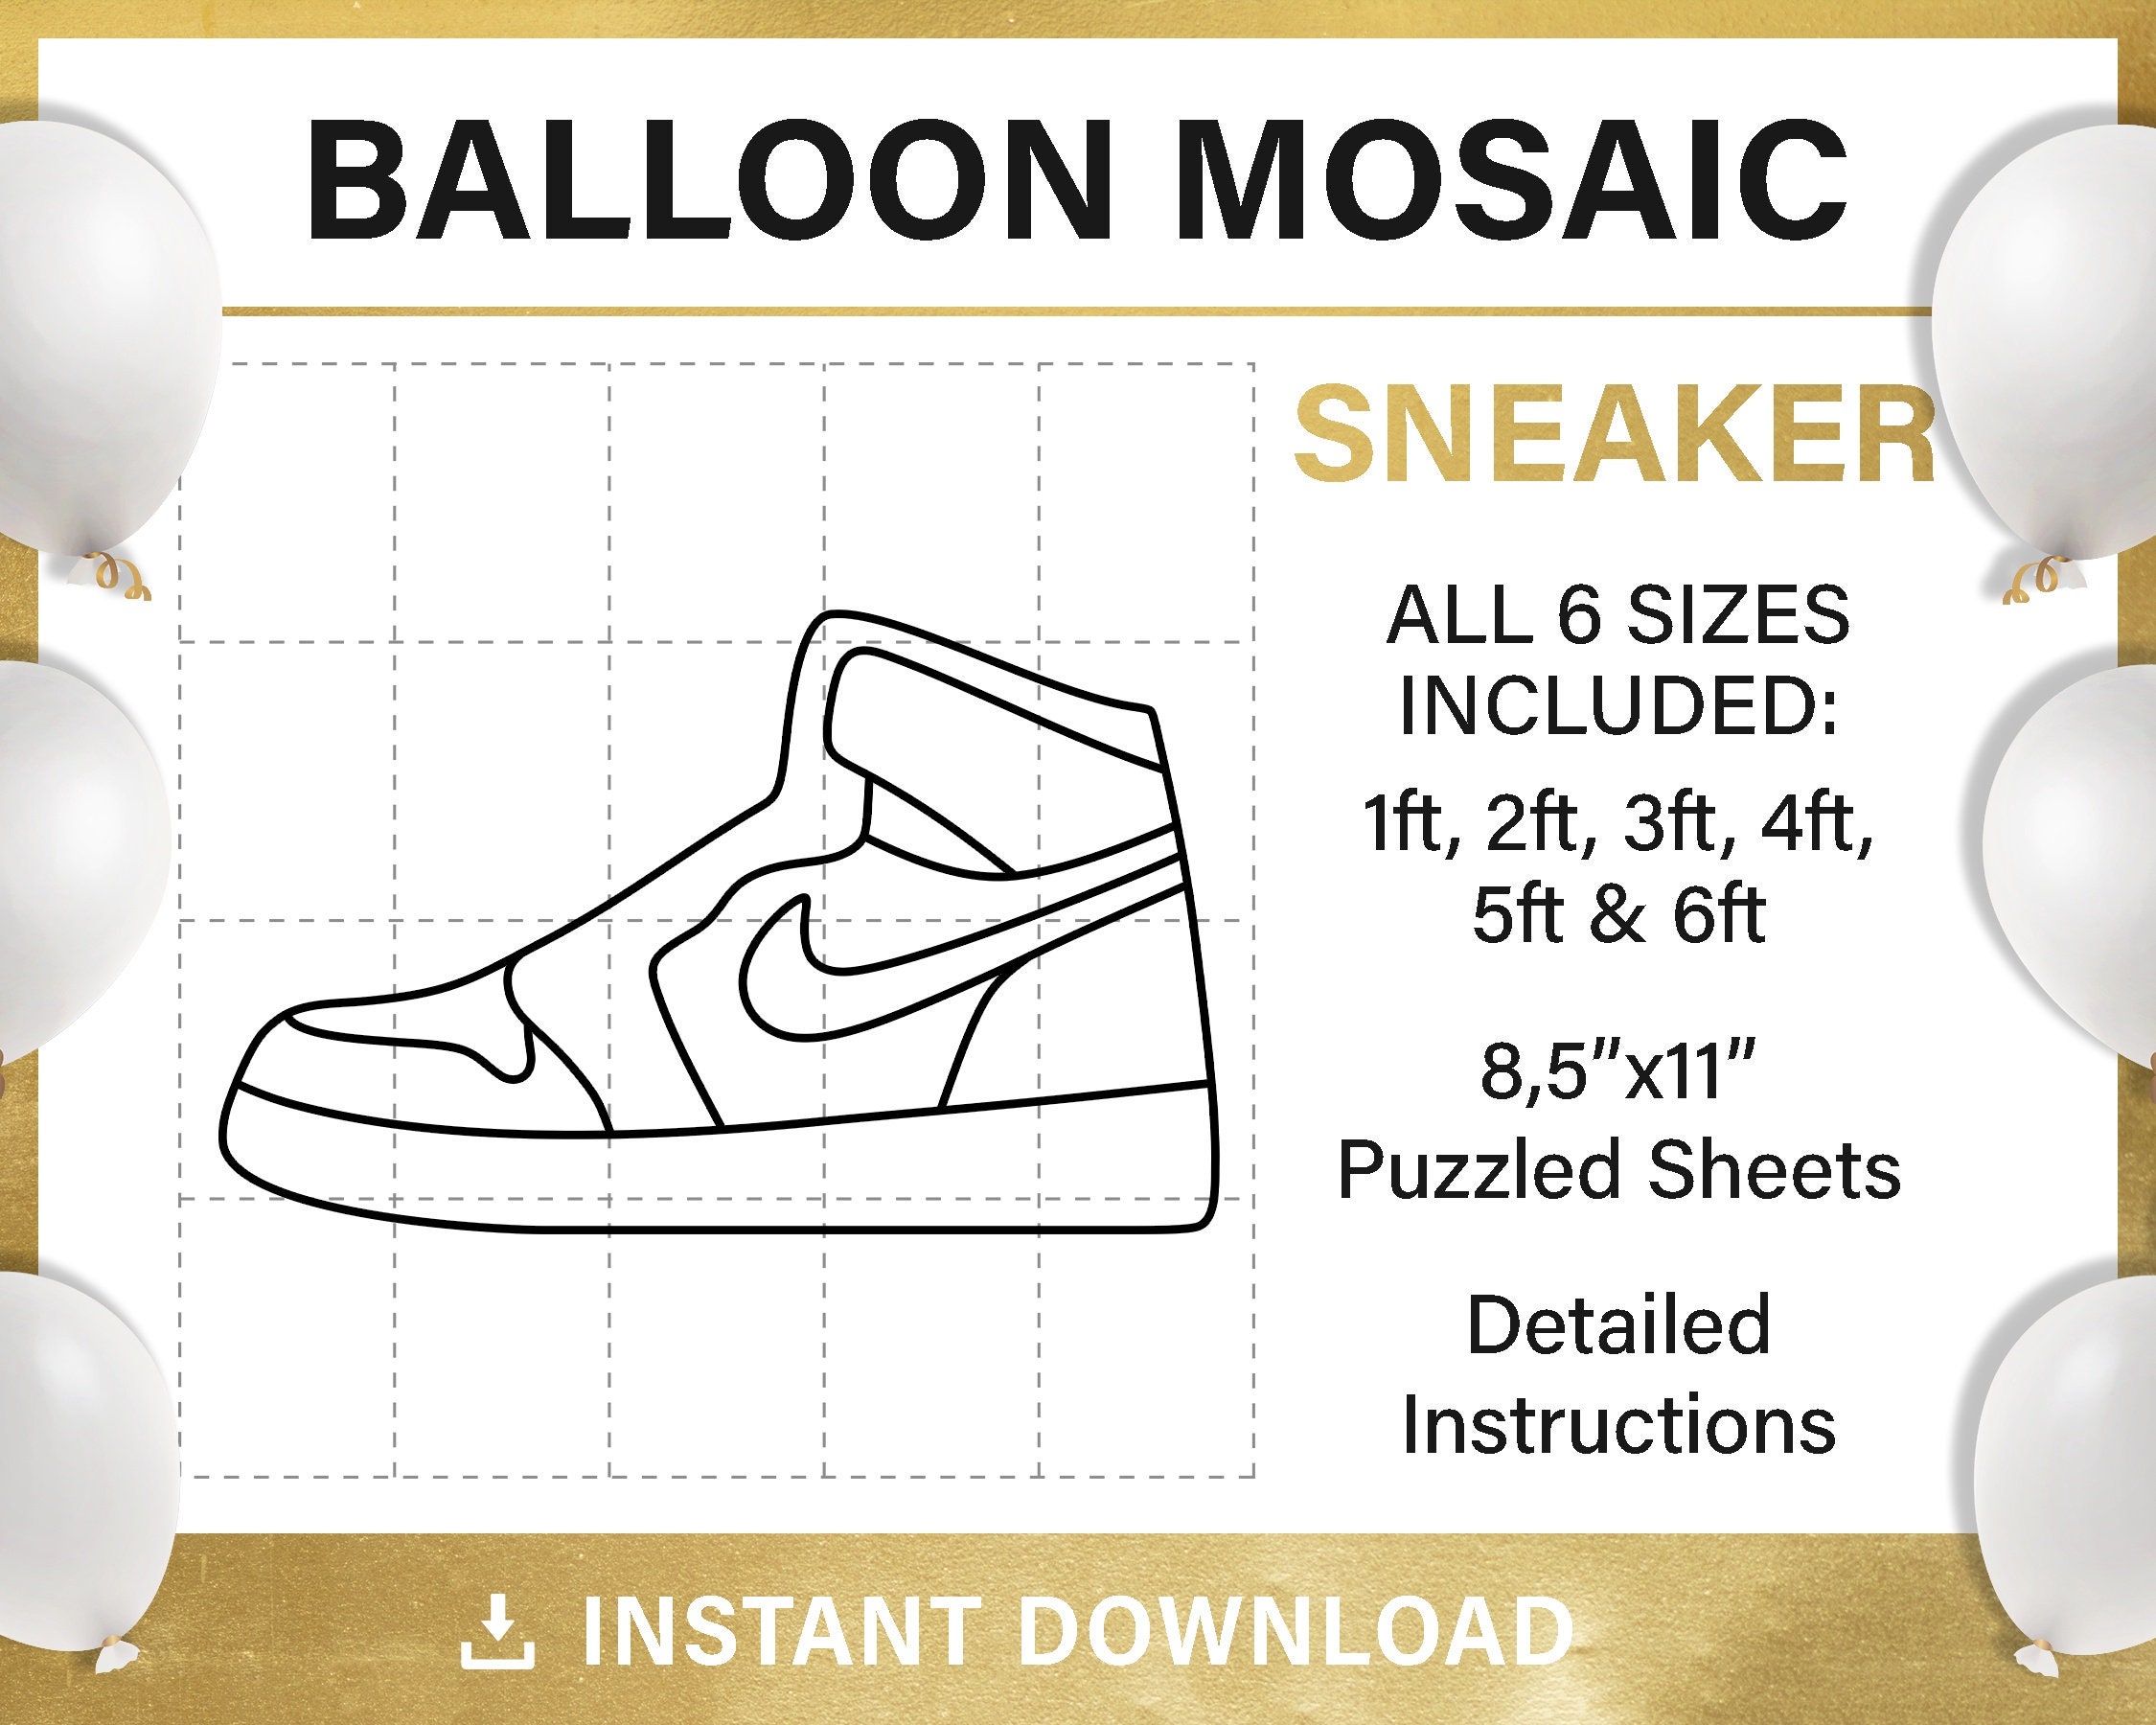 M & W Apparel Size Chart in Inches - Nike Download Printable PDF